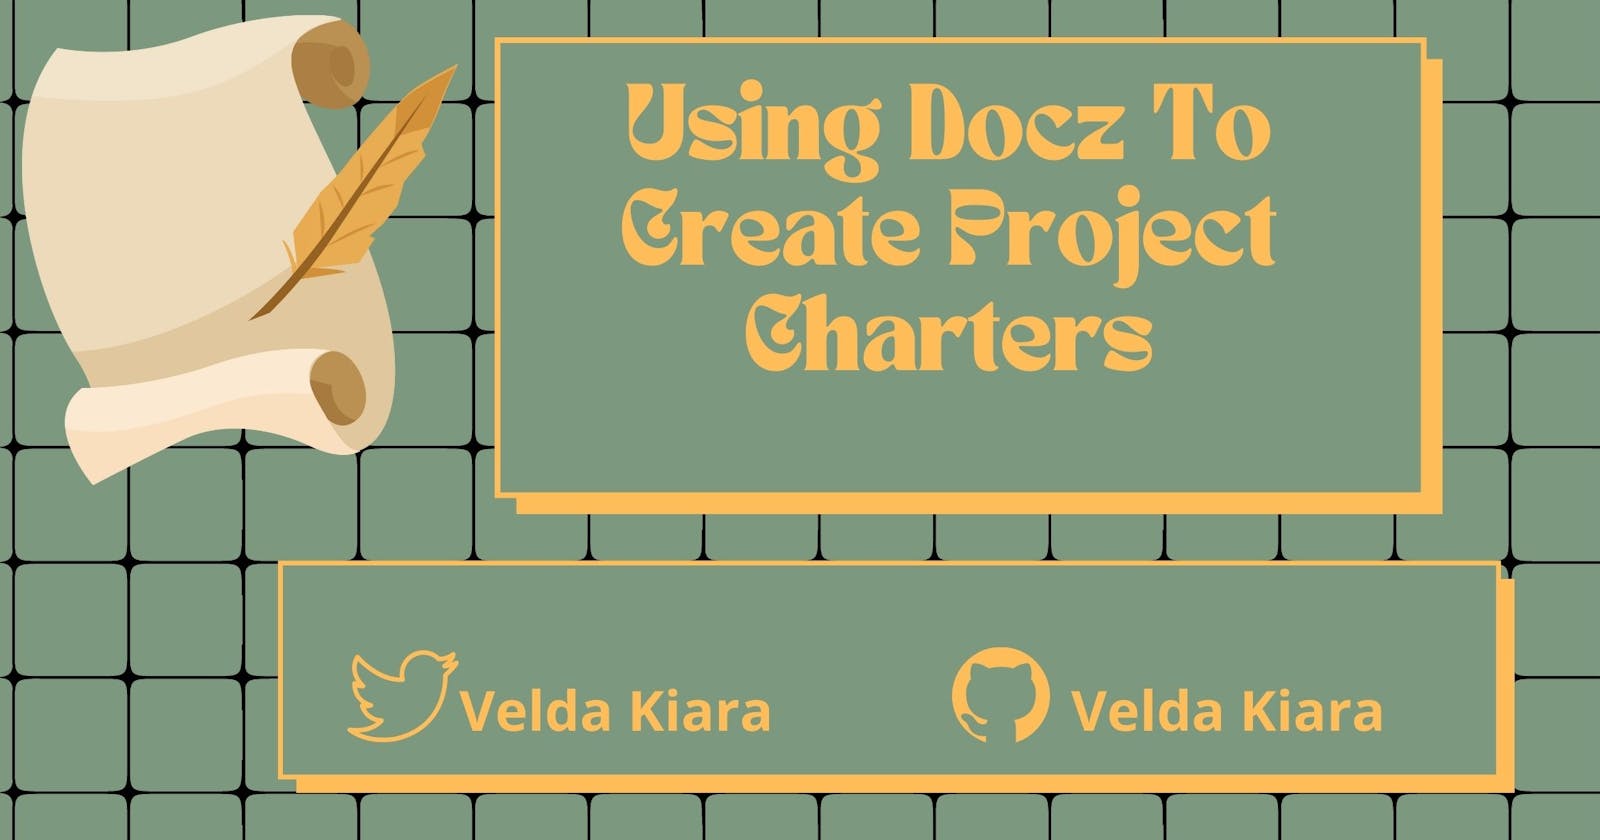 Using Docz To Create Project Charters